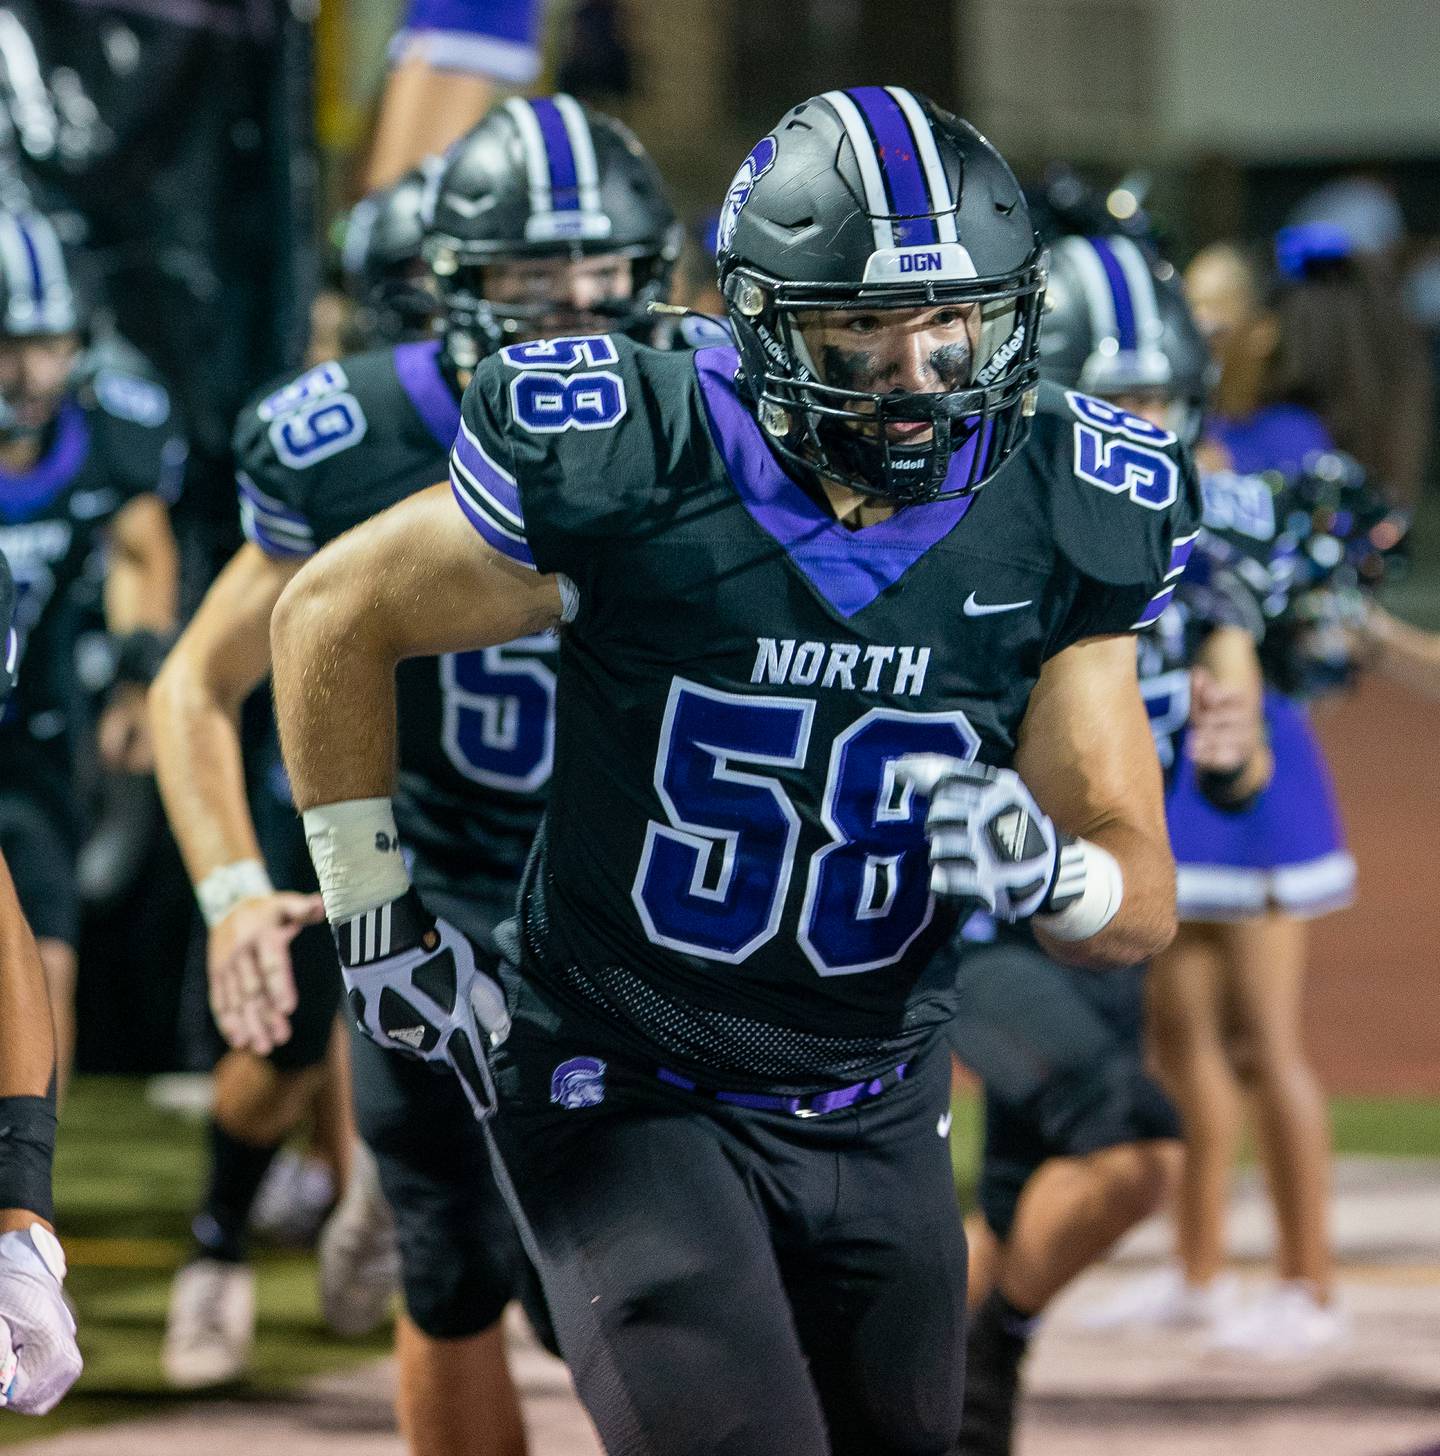 Downers Grove North's Ben Bielawski (58) takes the field against Downers Grove South prior to kickoff at Downers Grove North High School on Tuesday, Sep 9, 2022.